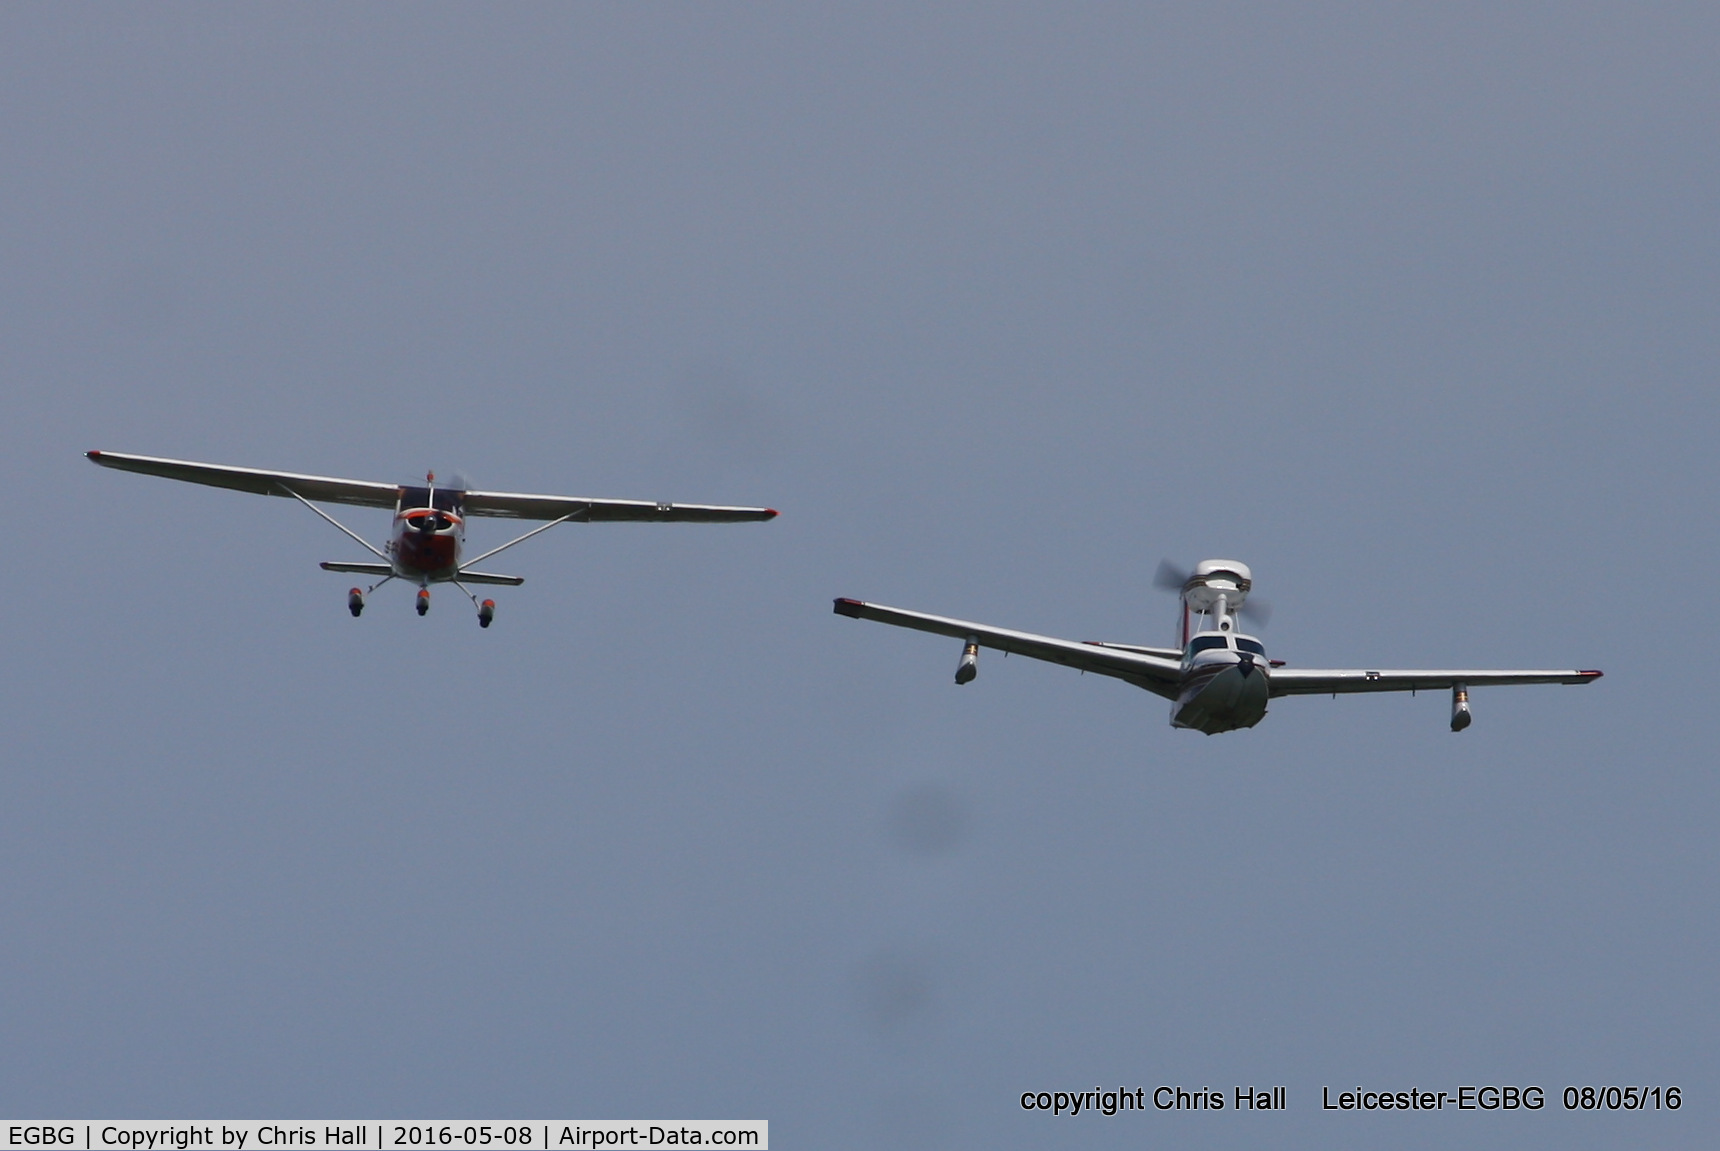 Leicester Airport, Leicester, England United Kingdom (EGBG) - Royal Aero Club air race at Leicester